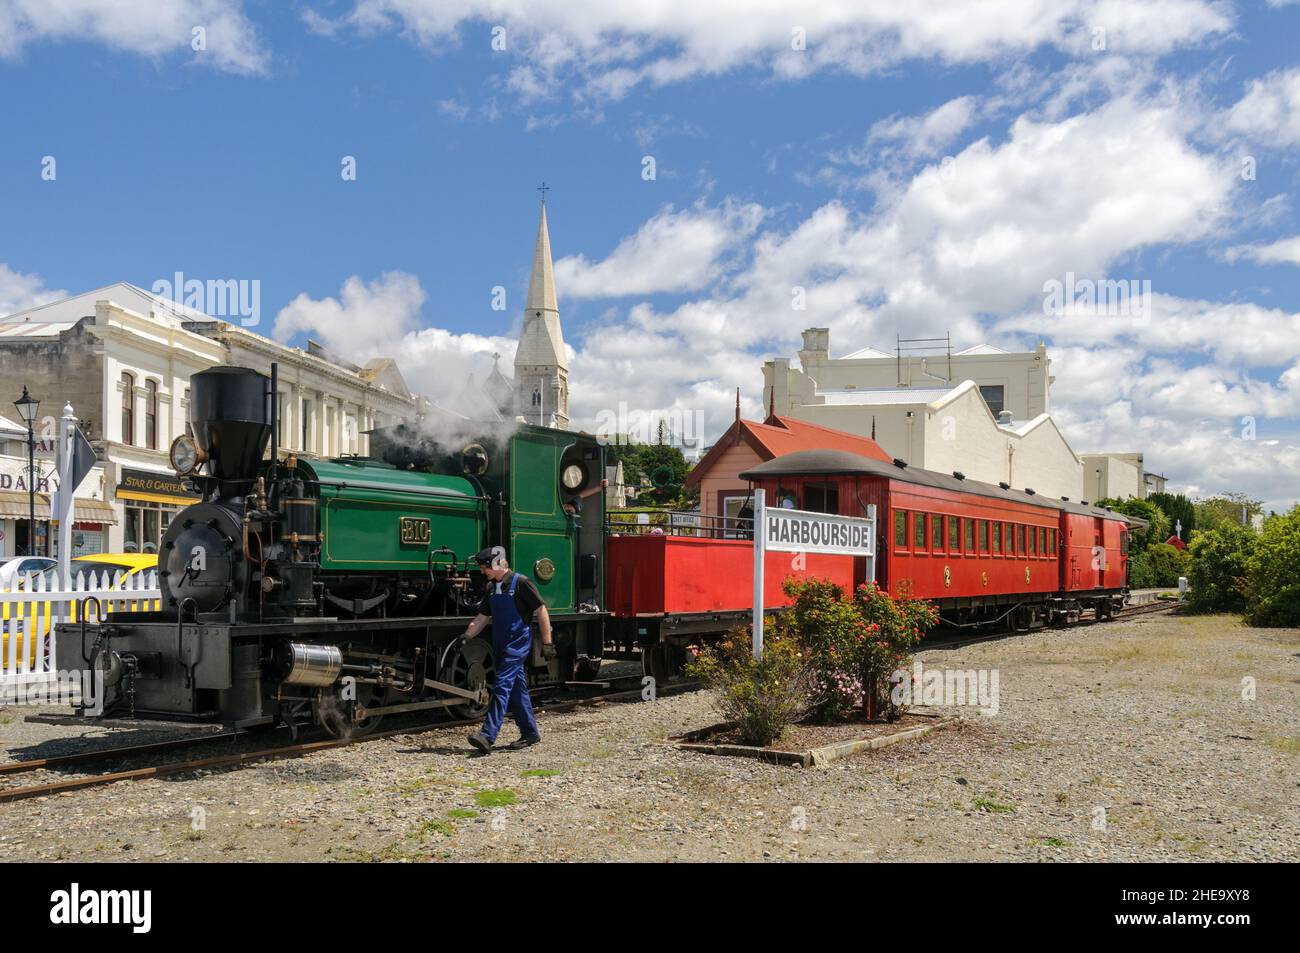 Oamaru Steam and Rail Society B10 locomotive and carriage at the Harbourside Station in the Oamaru Historic Victorian Precinct New Zealand. Stock Photo